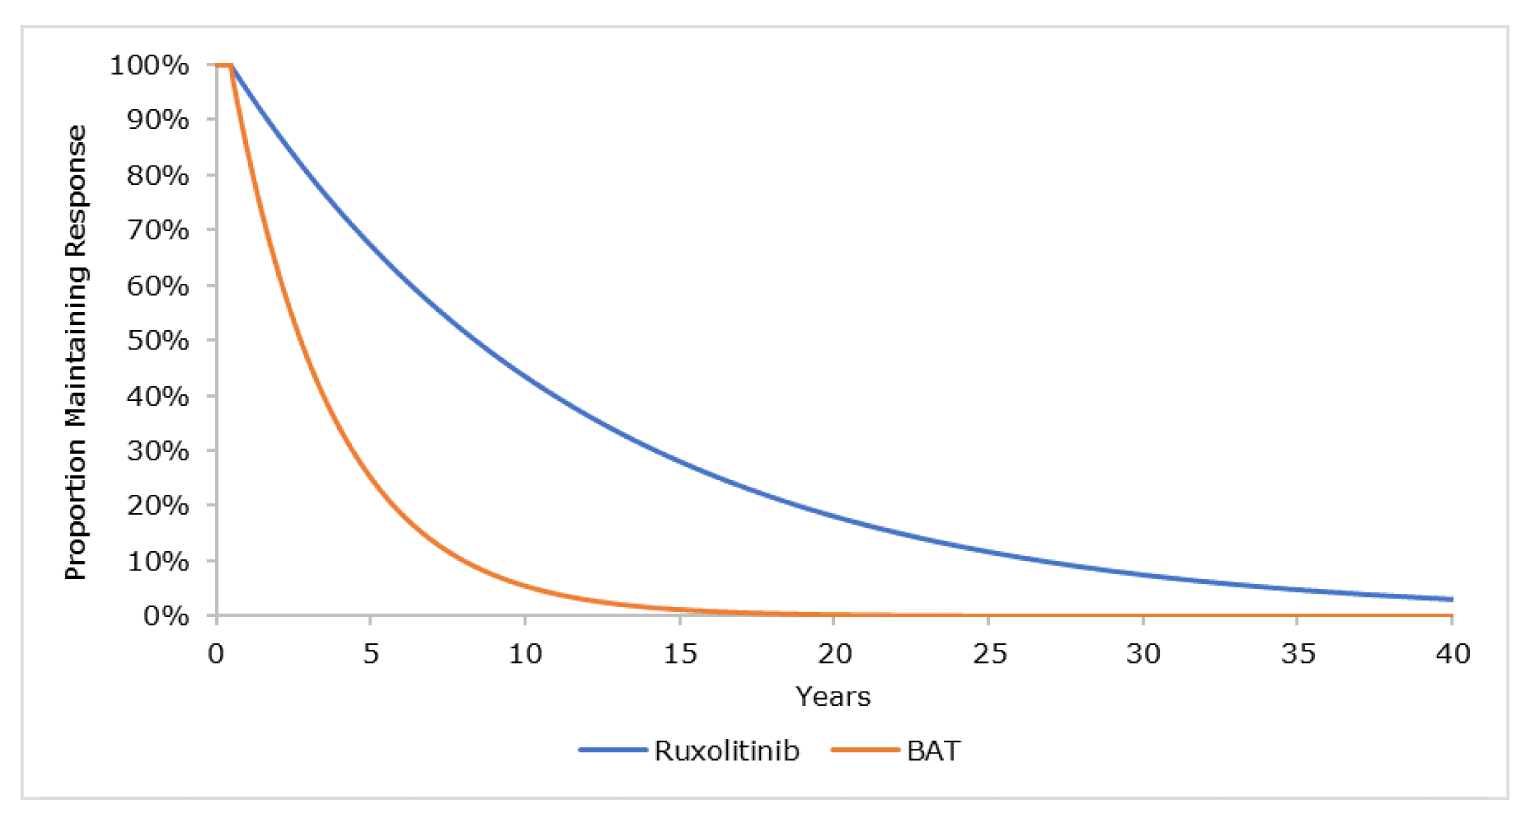 Line graph showing the extrapolated duration of response by treatment over 40 years, where about 10% are responders for best available therapy after 10 years compared to about 40% for ruxolitinib.